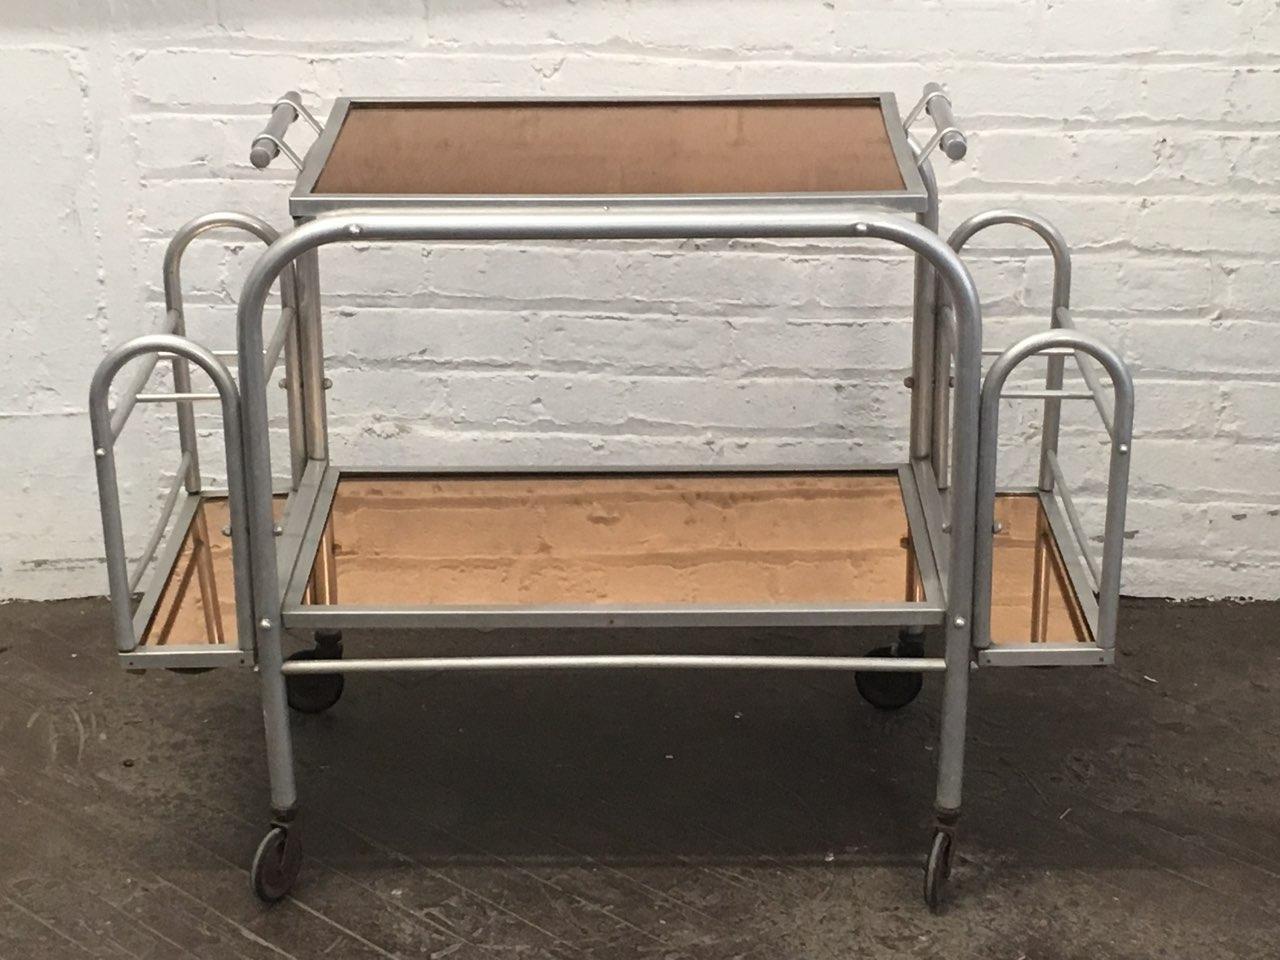 Deco bar cart / service trolley with removable tray has a brushed aluminum frame, peach mirrored glass tops, three bottle holders on each side, and four wheels for easy moving.